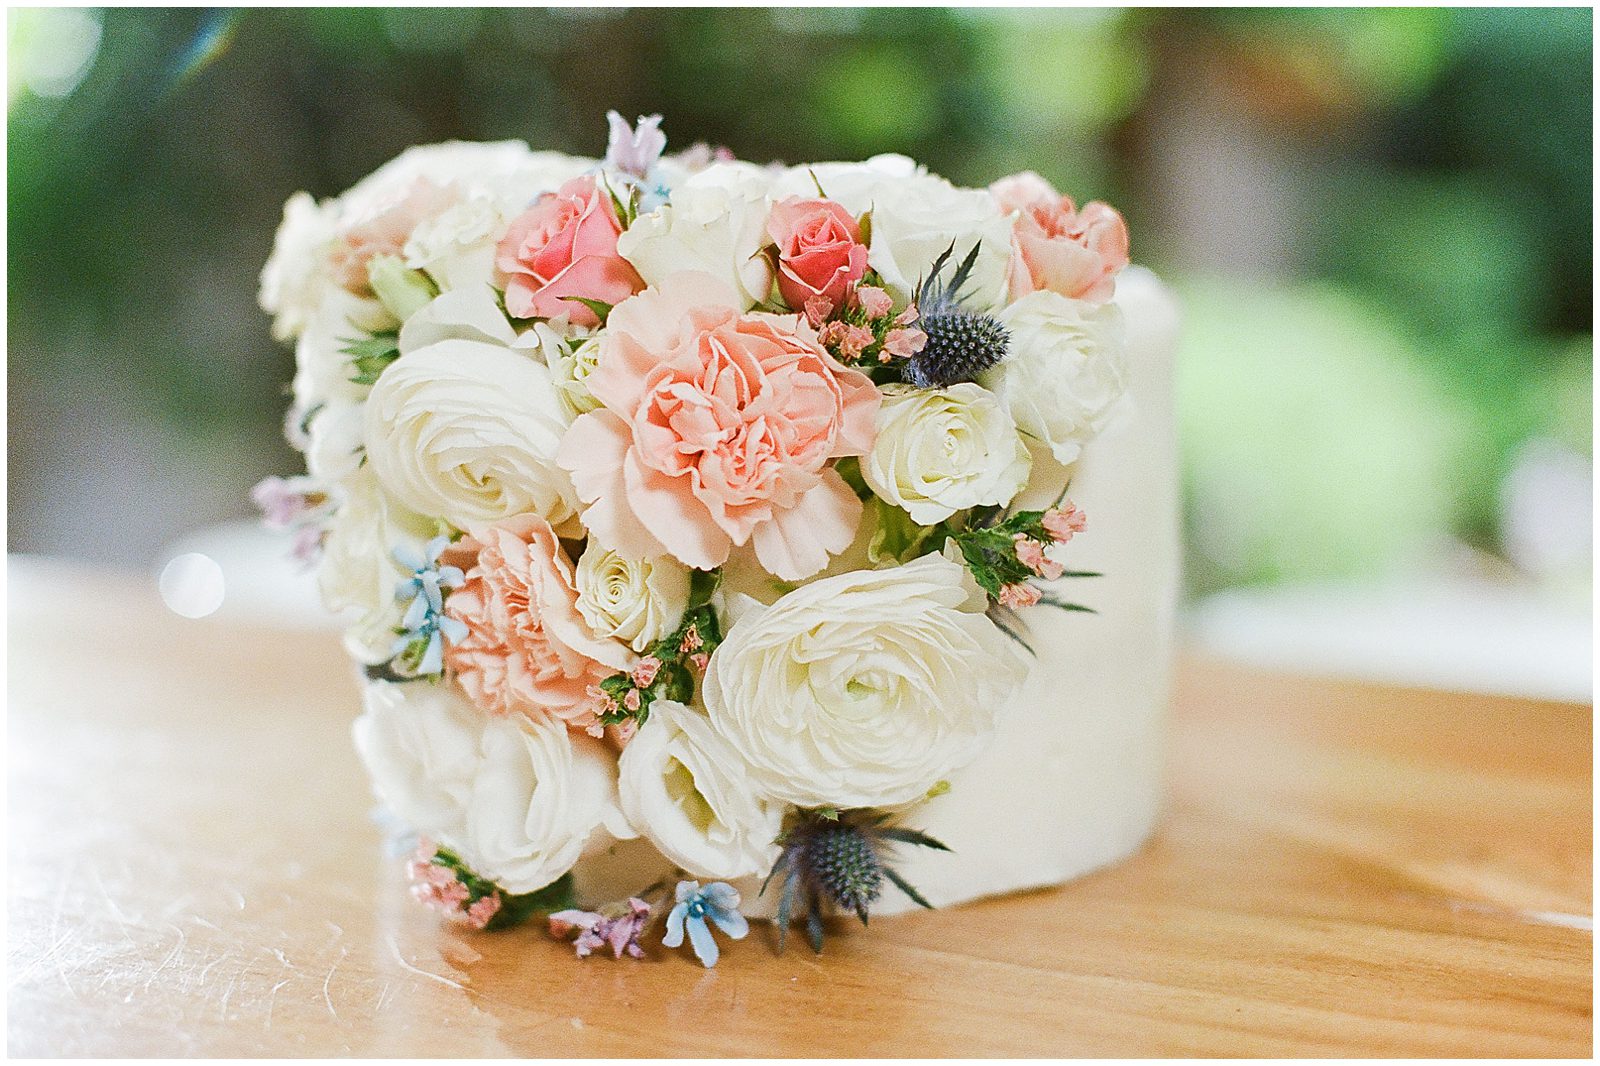 Small wedding Cake Covered in Flowers Photo